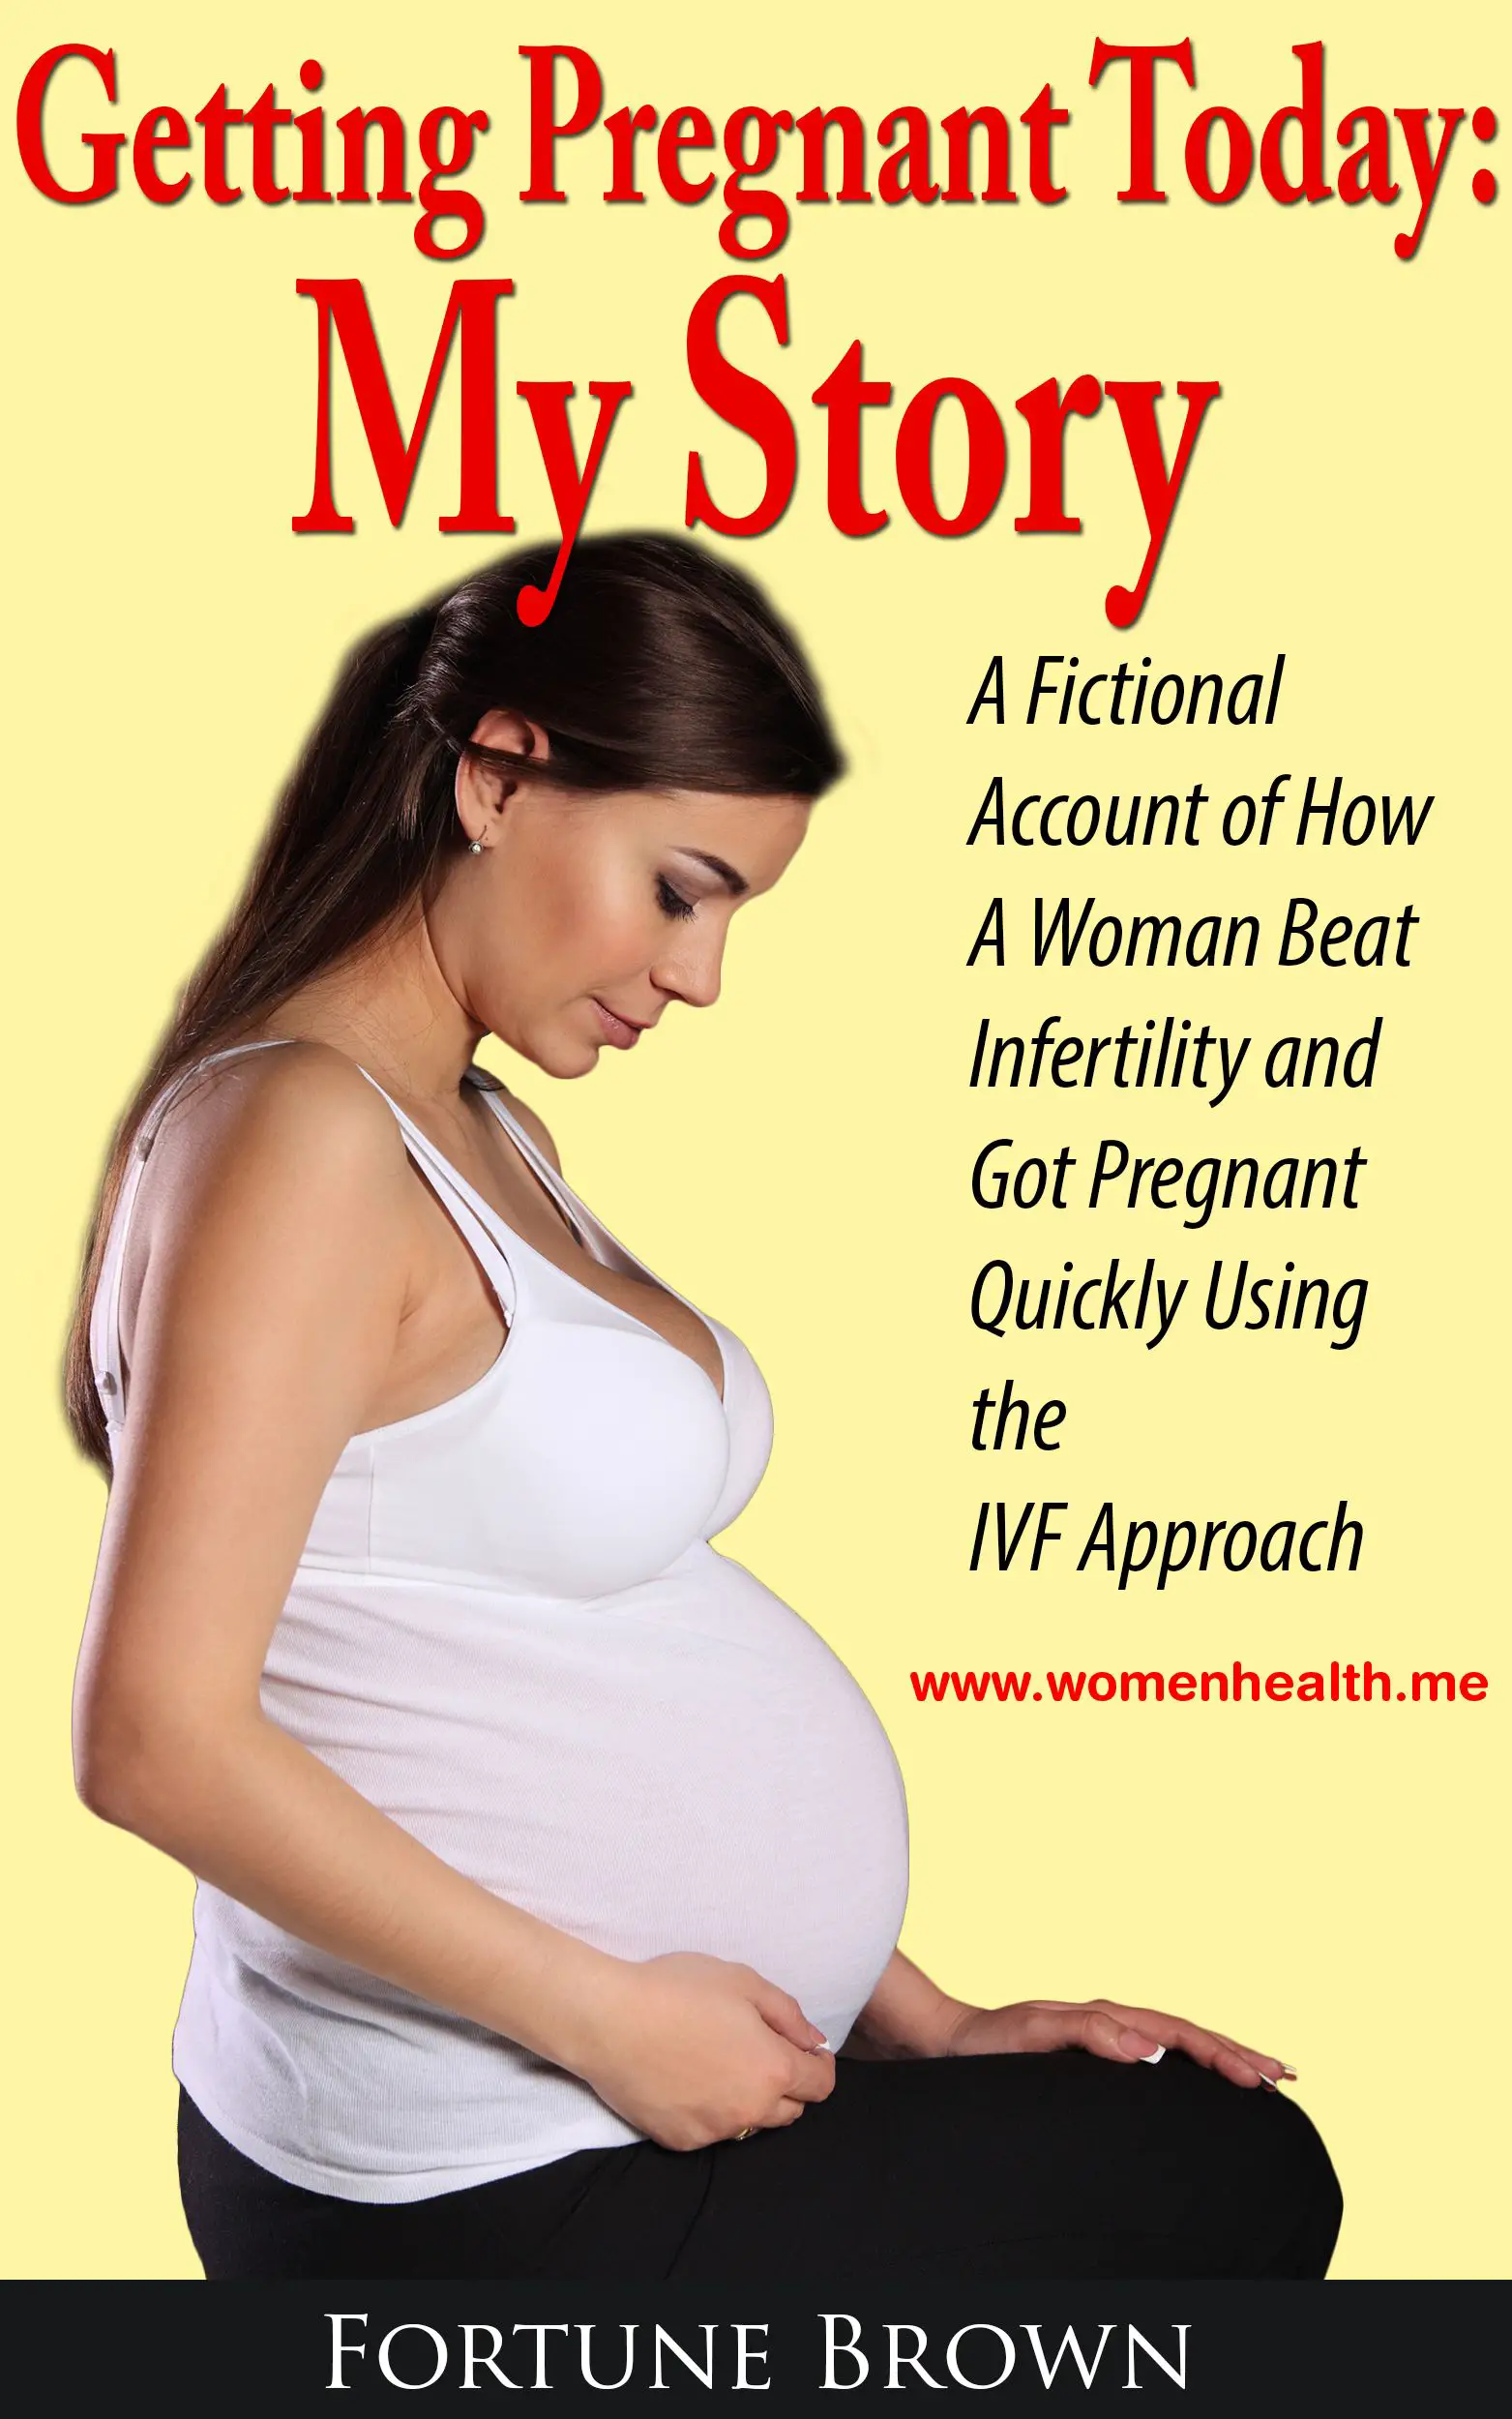 Have you been trying to get pregnant, but have not been successful ...